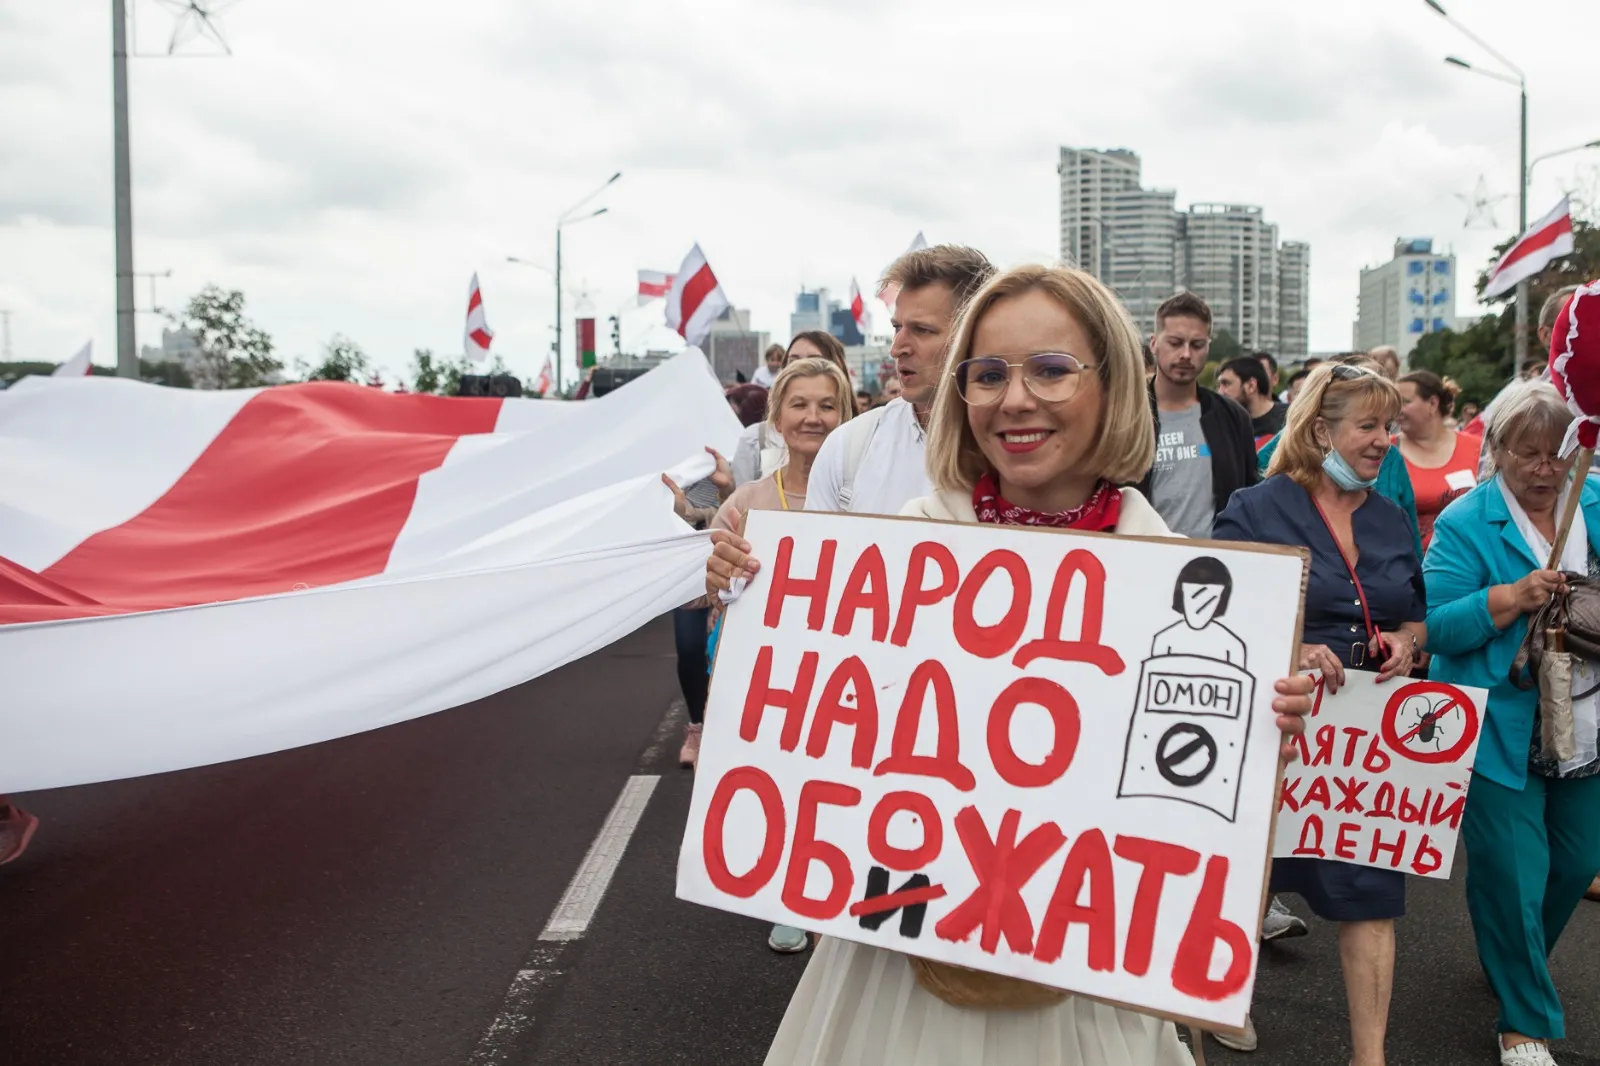 Belarus demonstration for free elections, August 2020